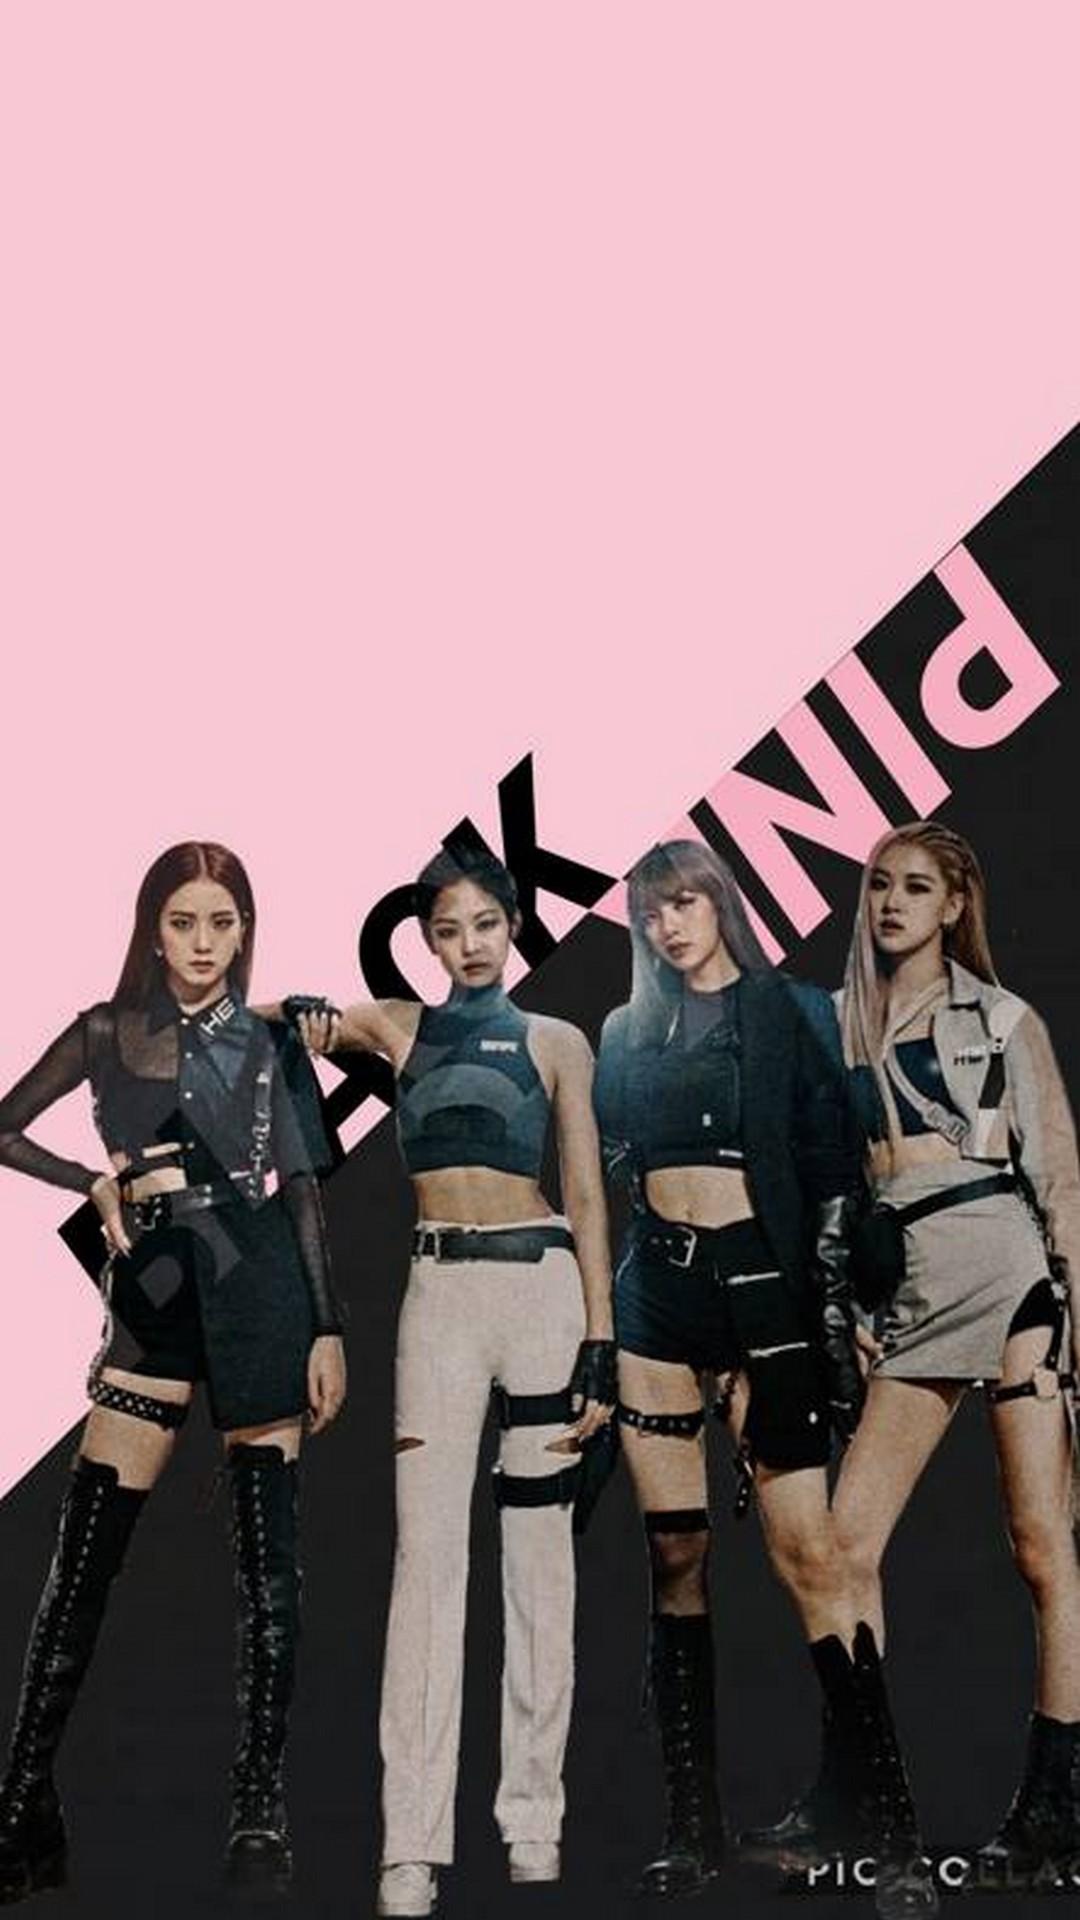 Blackpink Wallpaper For Android Android Wallpaper